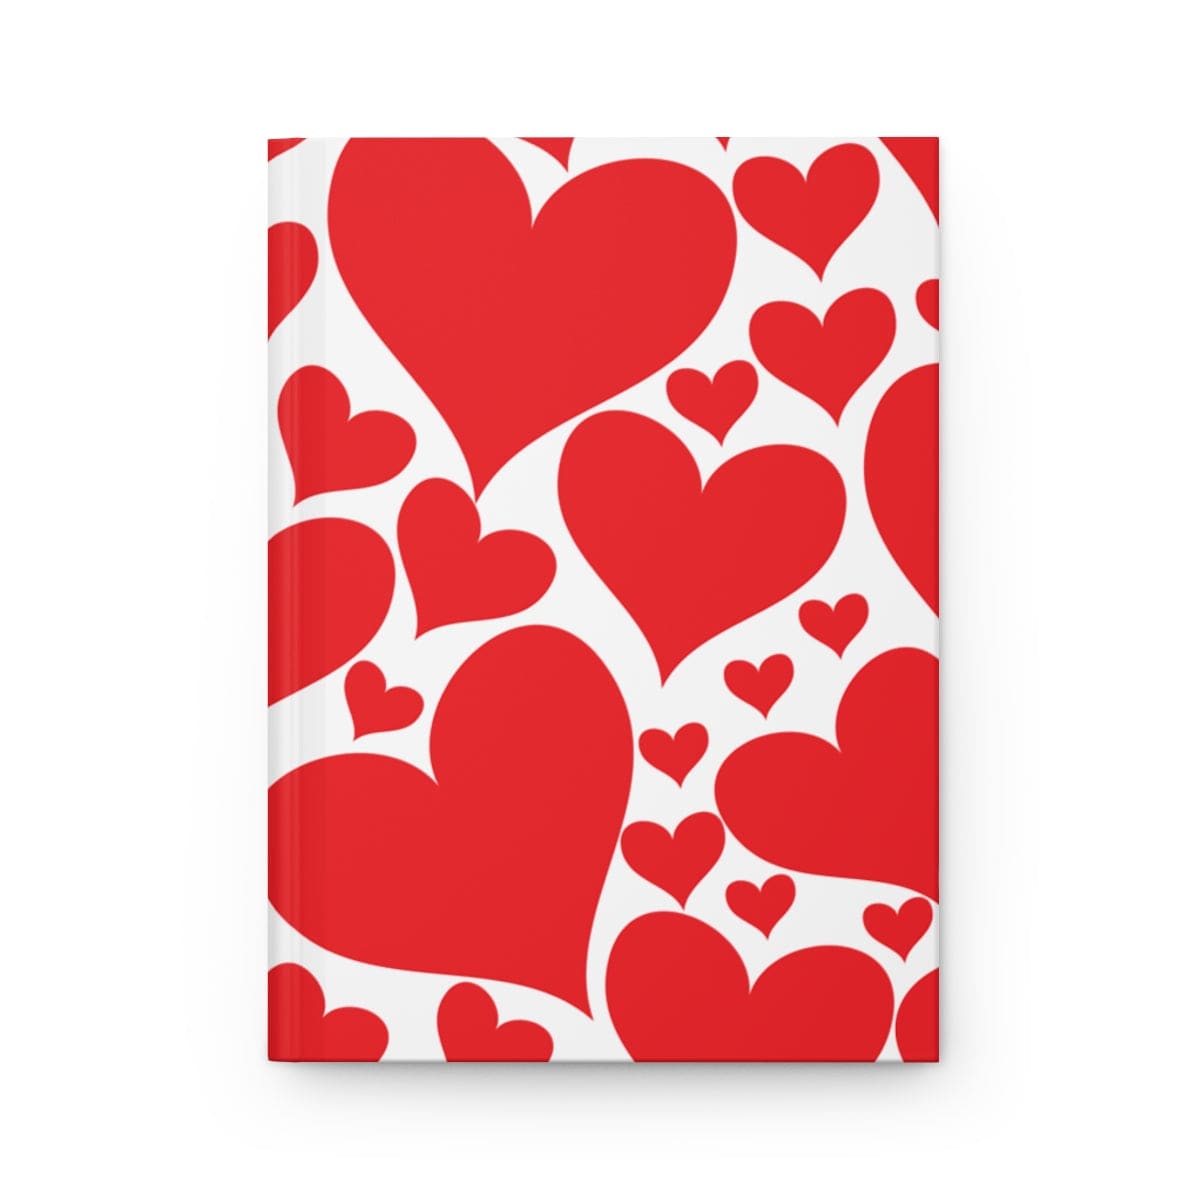 Hardcover Journal - Lined Notebook / Love Red Hearts - Stationery | Journals